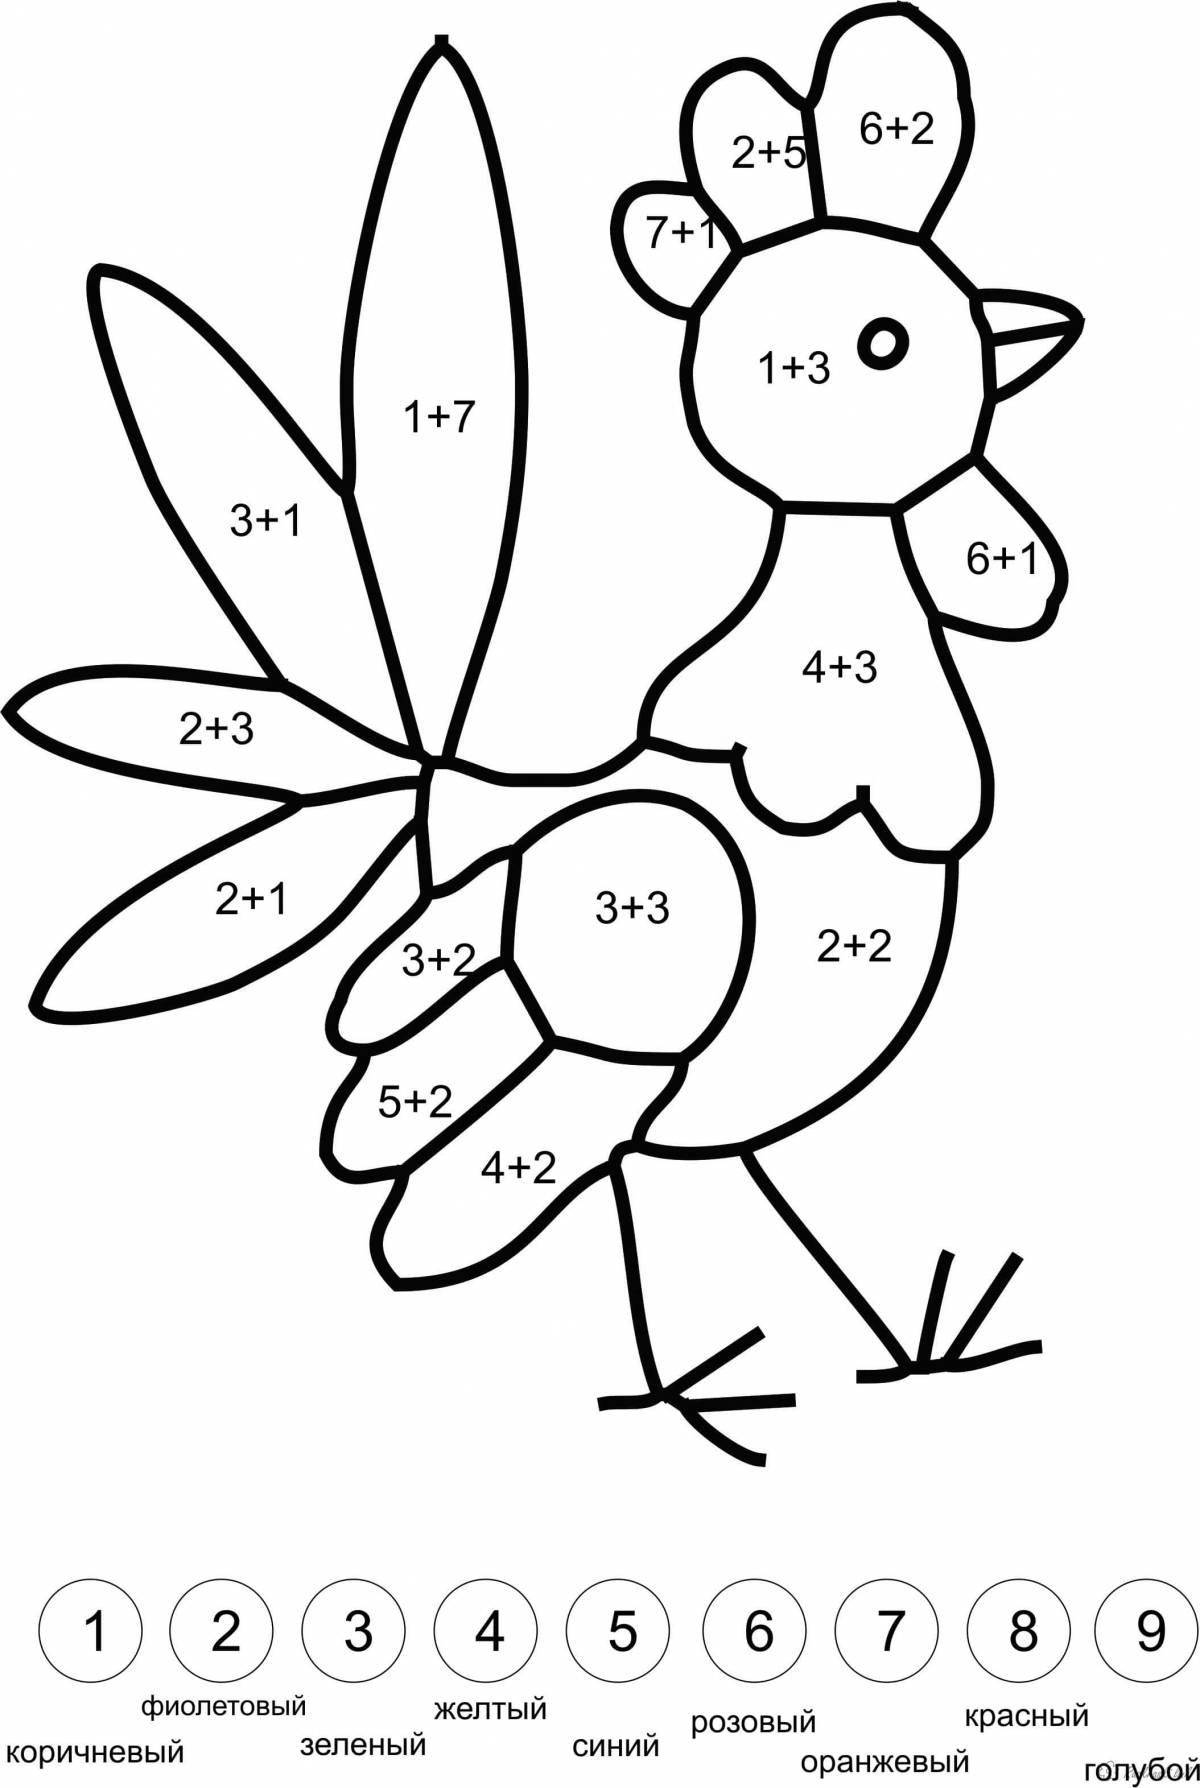 Fun math coloring book for 4-5 year olds